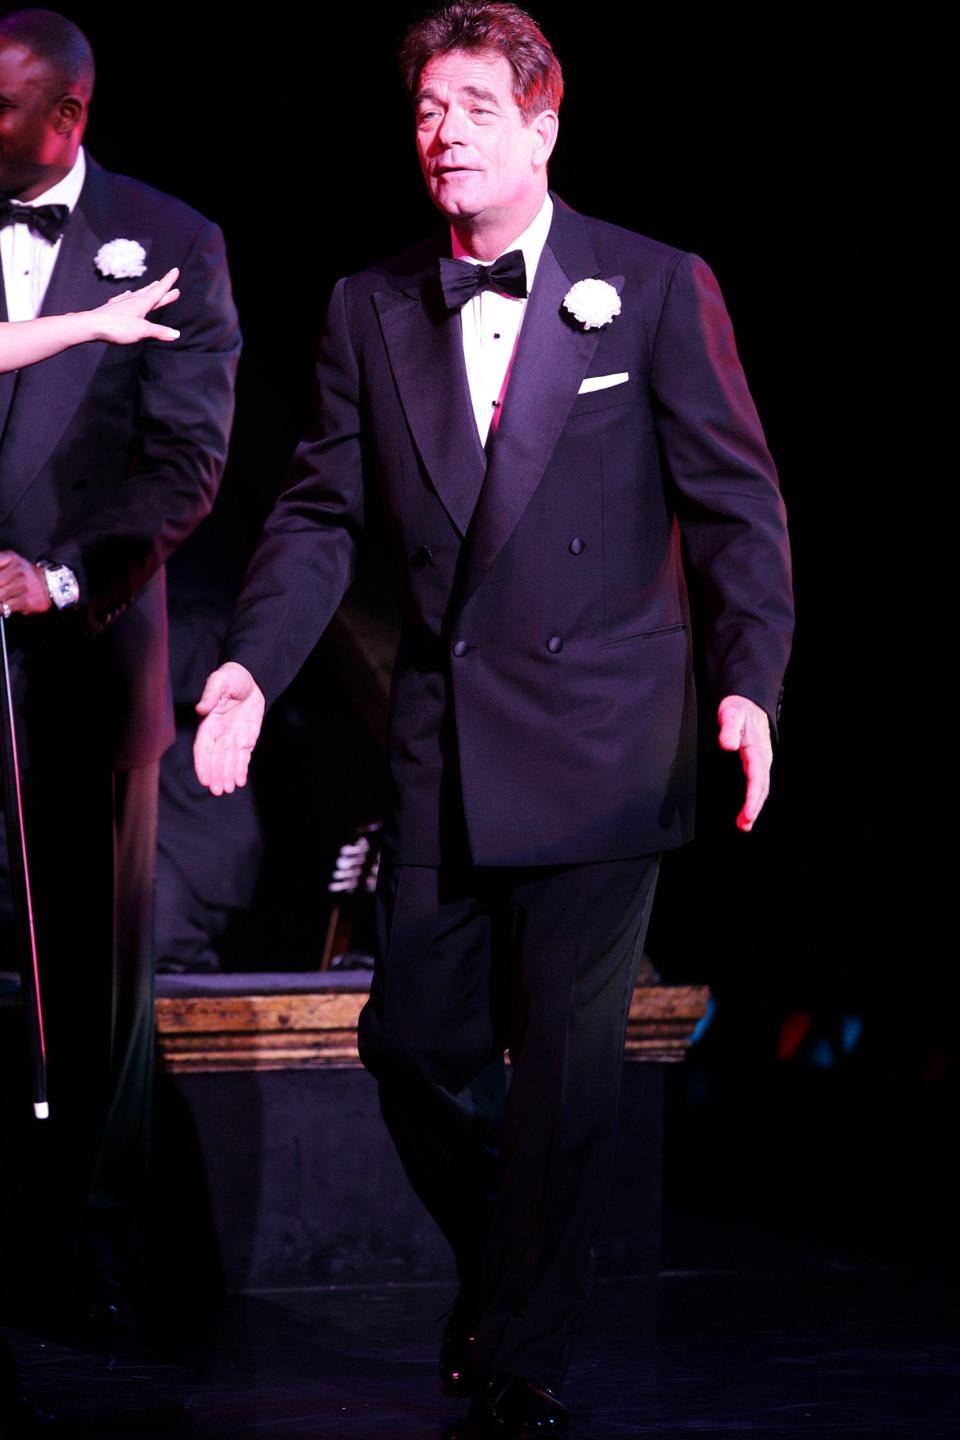 Huey Lewis in a tuxedo on stage